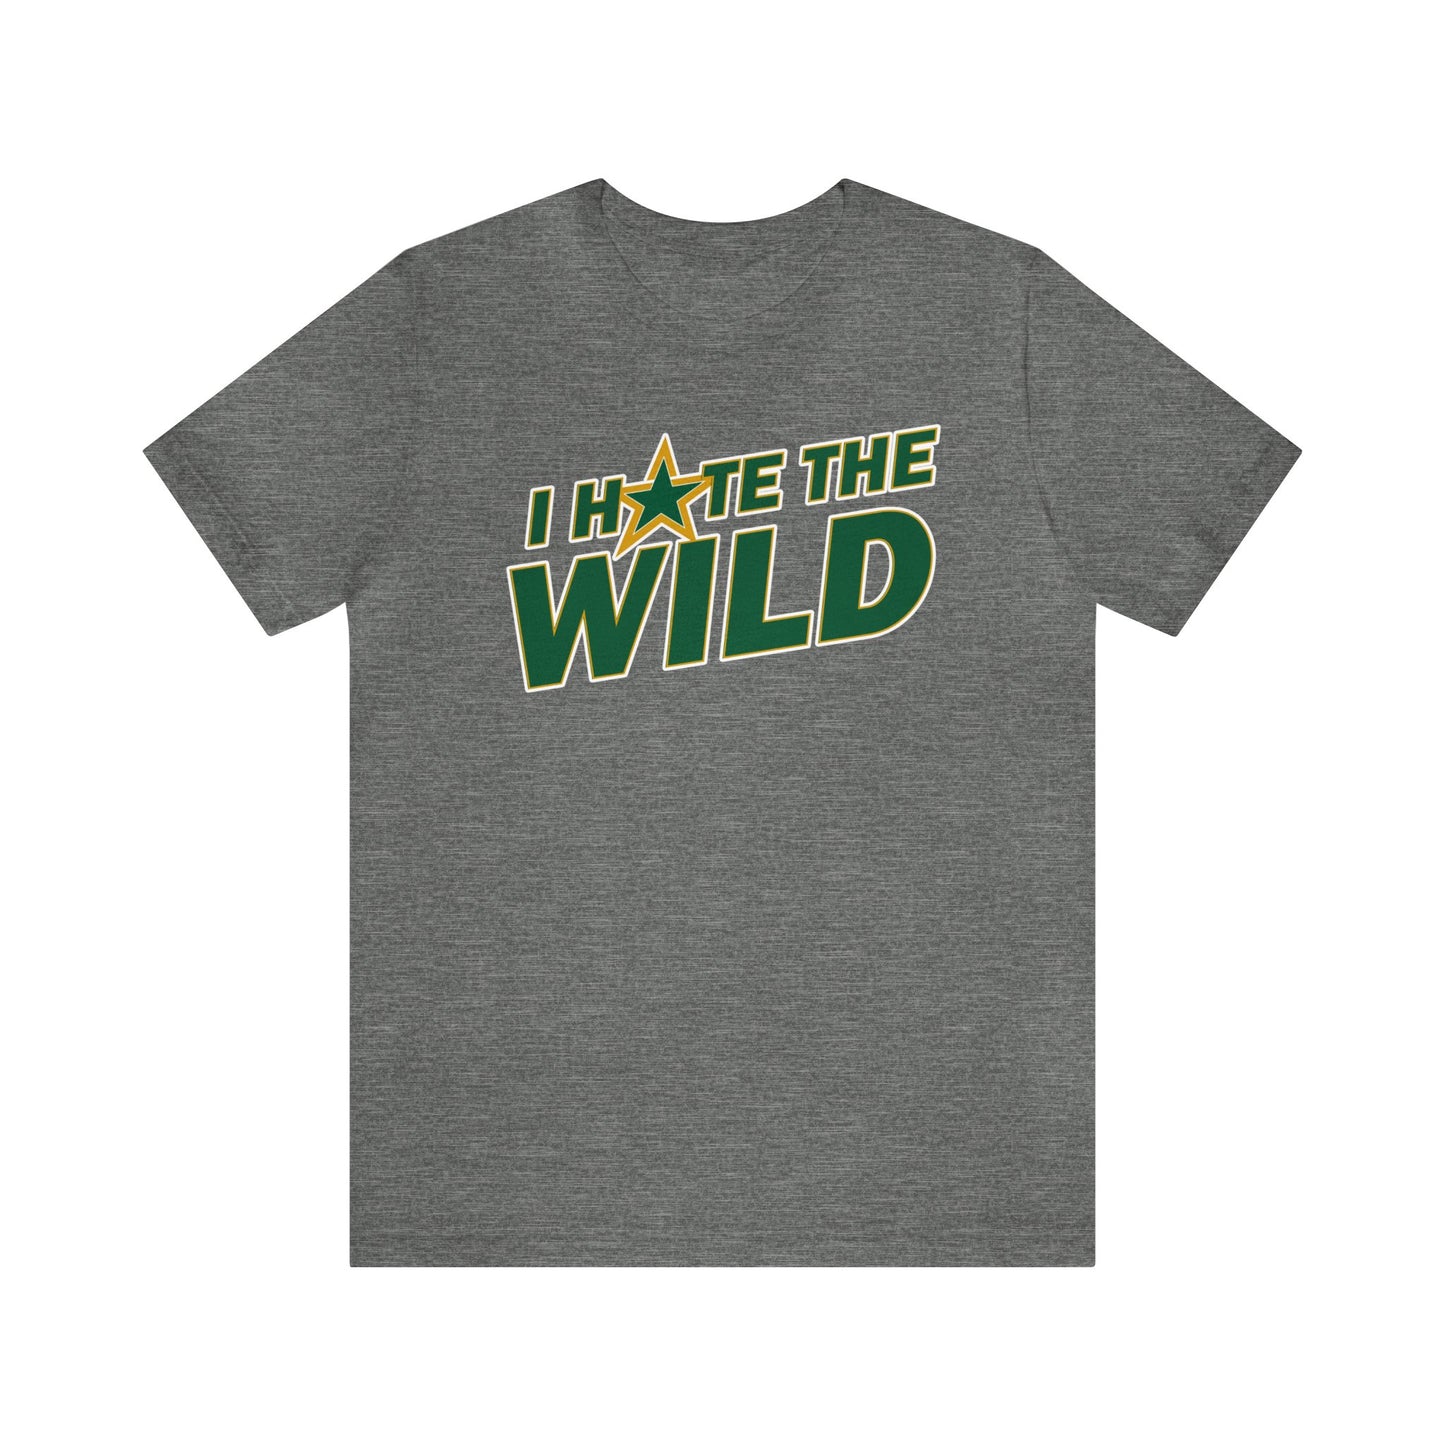 That Fairly Tame Team (for Dallas fans) - Unisex Jersey Short Sleeve Tee